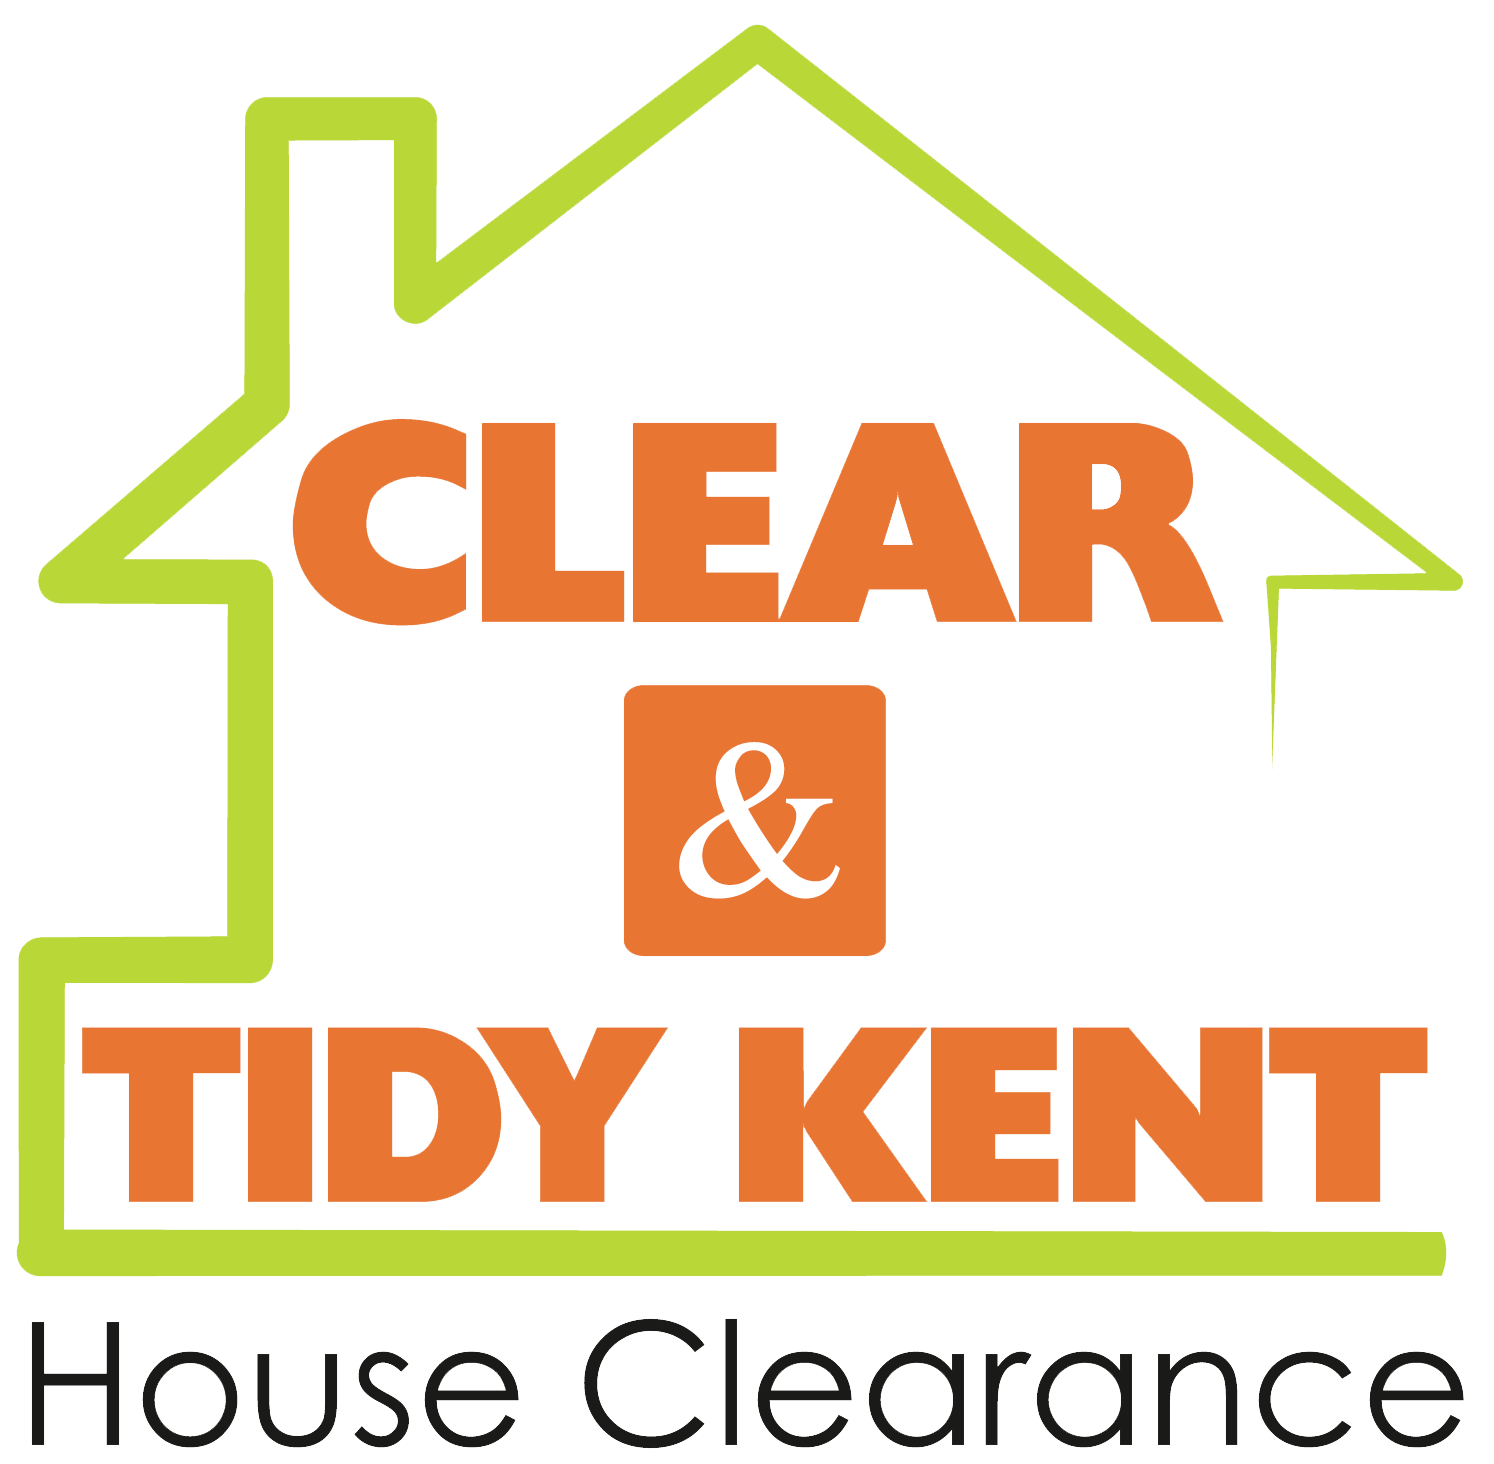 House Clearances in Kent